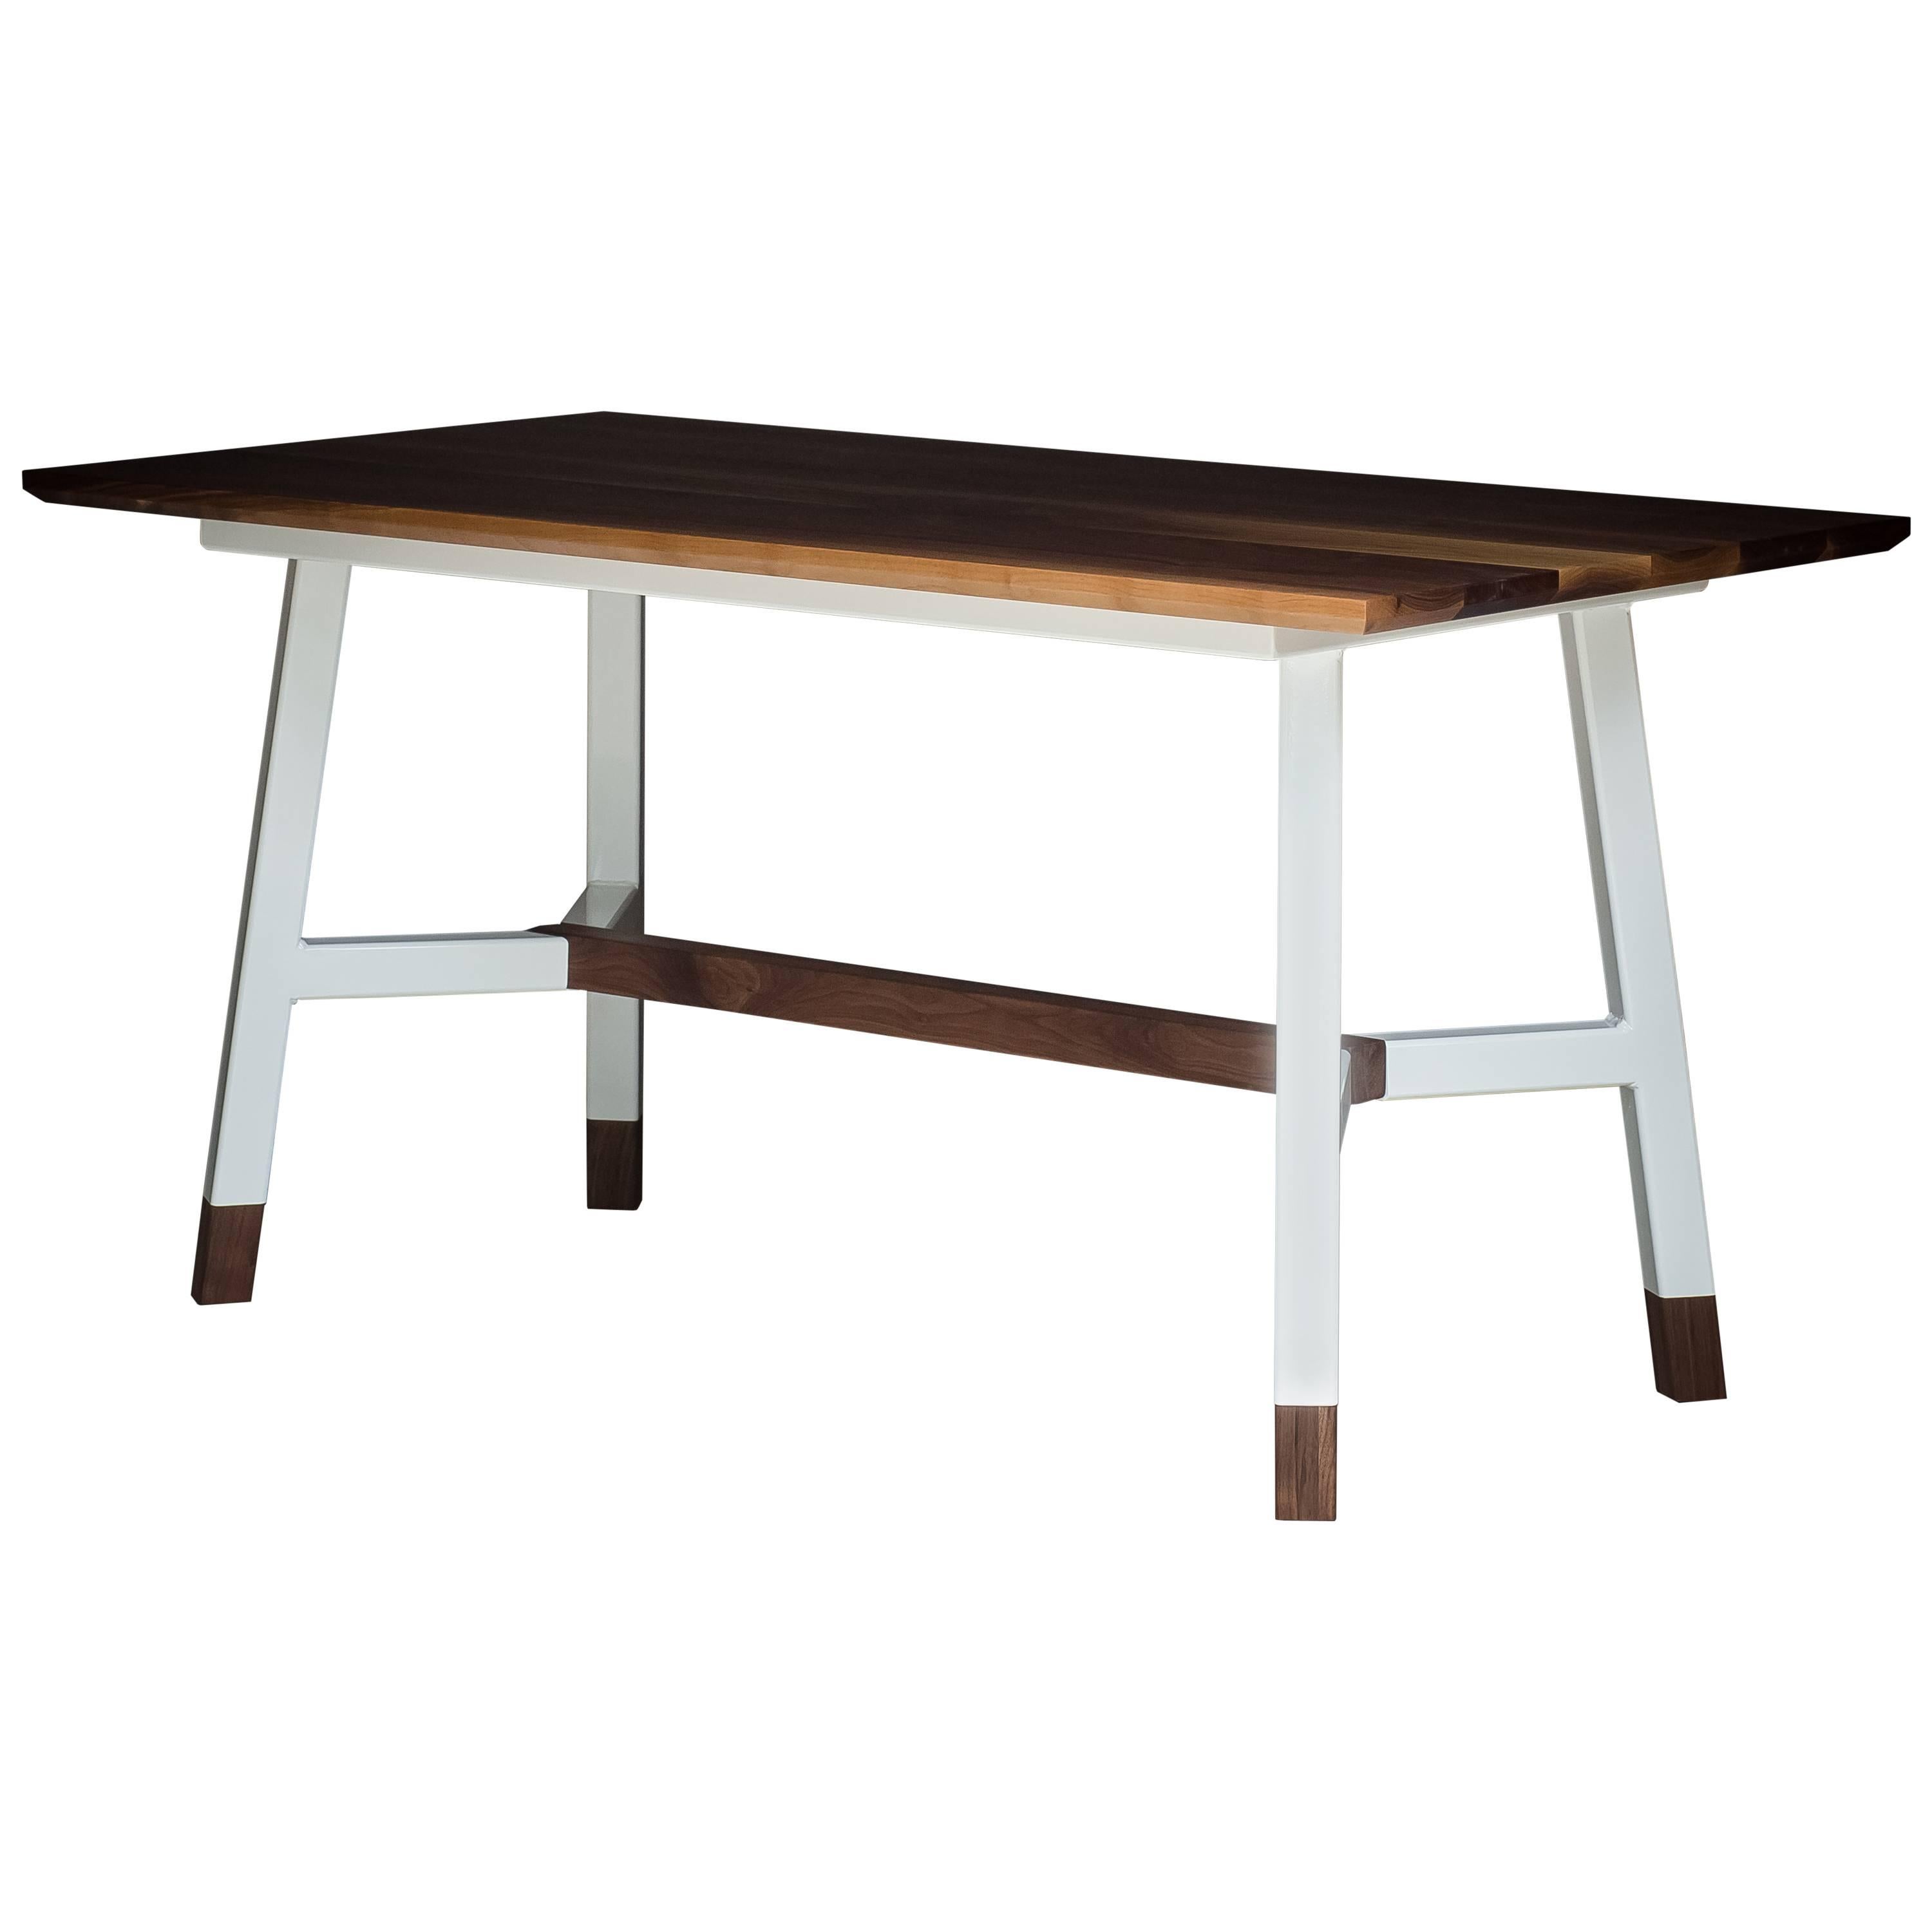 The A-Frame, Modern Walnut and Powder Coated Steel Dining Table.

Solid walnut table top with a chamfered edge. Powder coated welded steel base with solid hand-carved walnut feet and crossbar. The A-frame can be crafted from walnut or white oak and